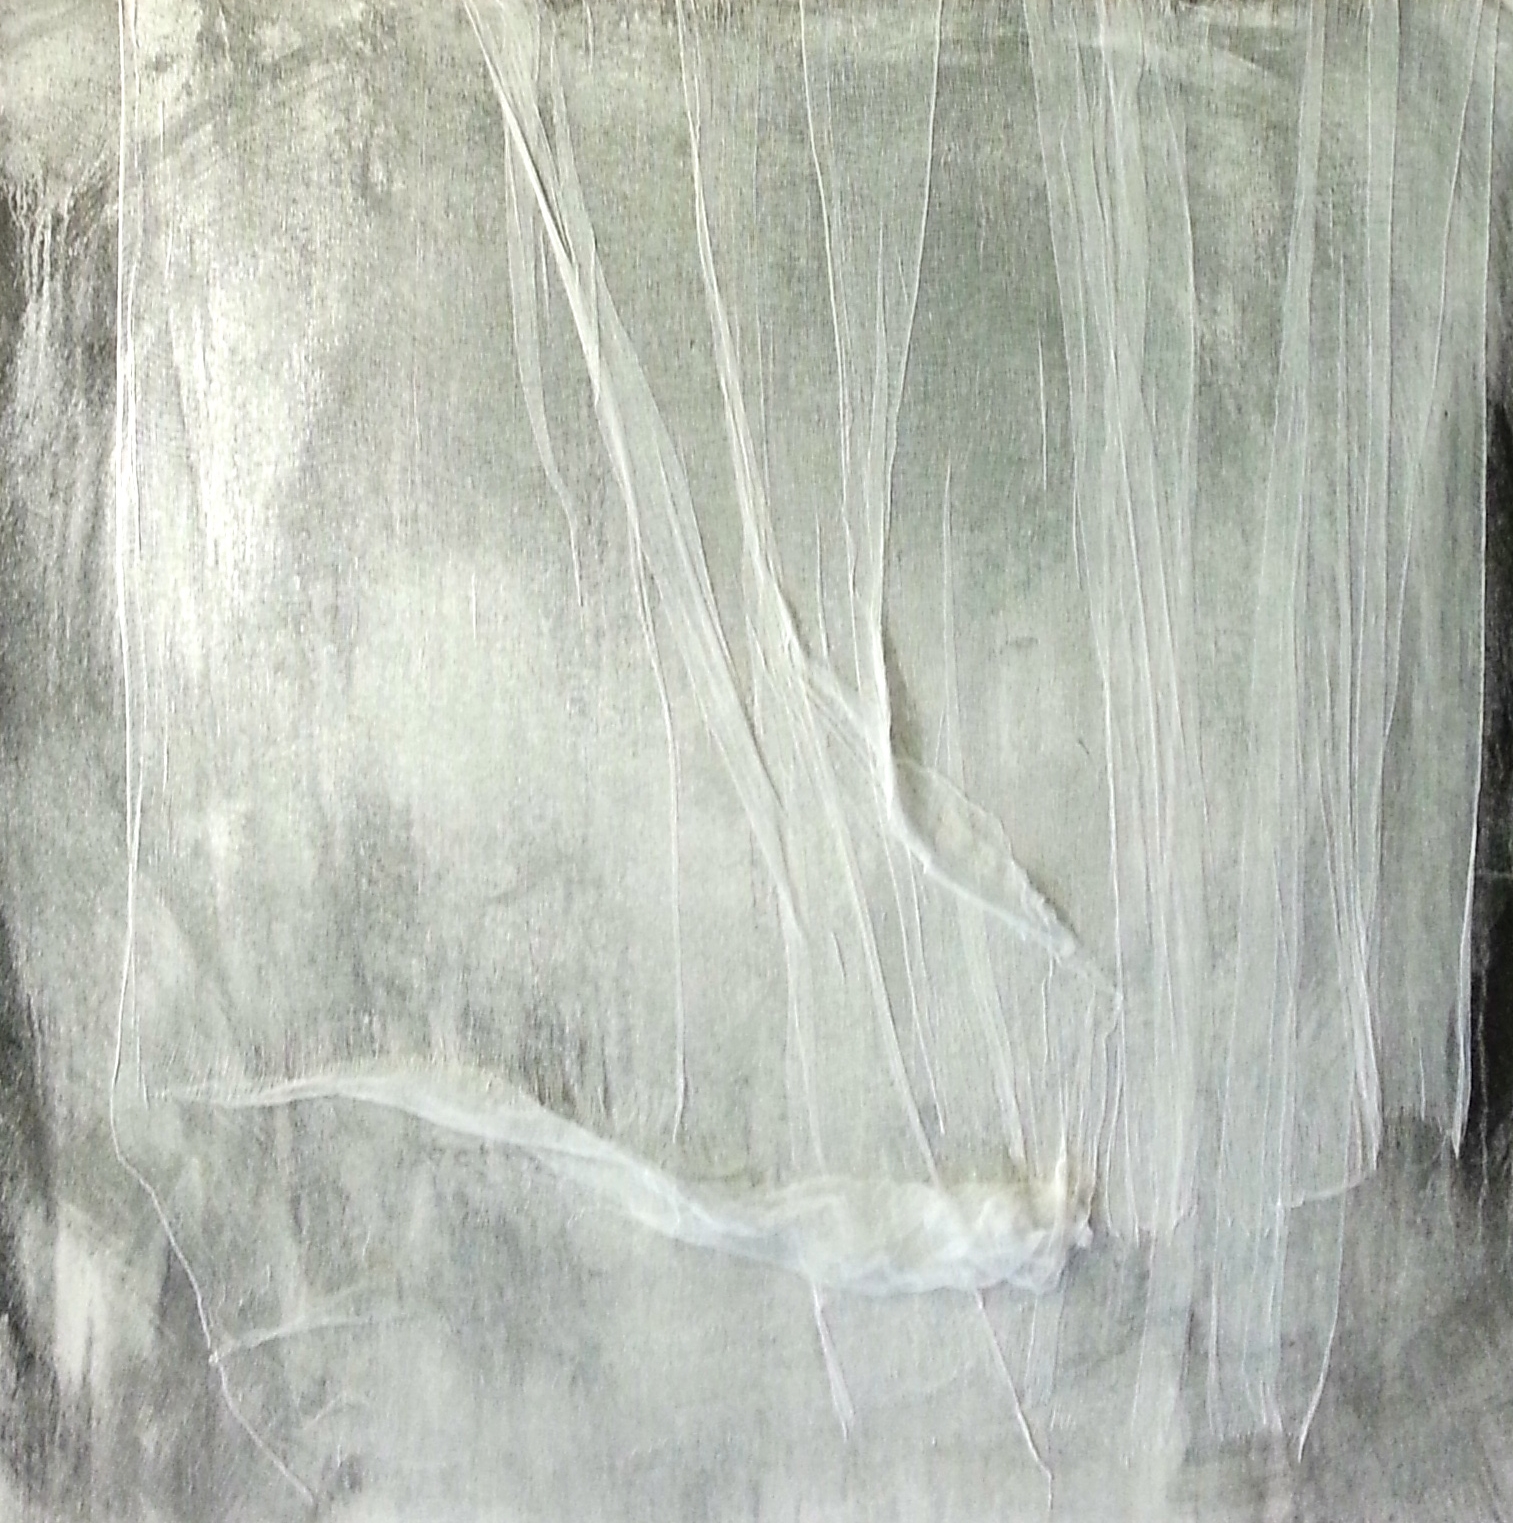  Weightlessness 3, 2015 48 x 48 inches Acrylic, gauze, glue, mixed media on canvas 